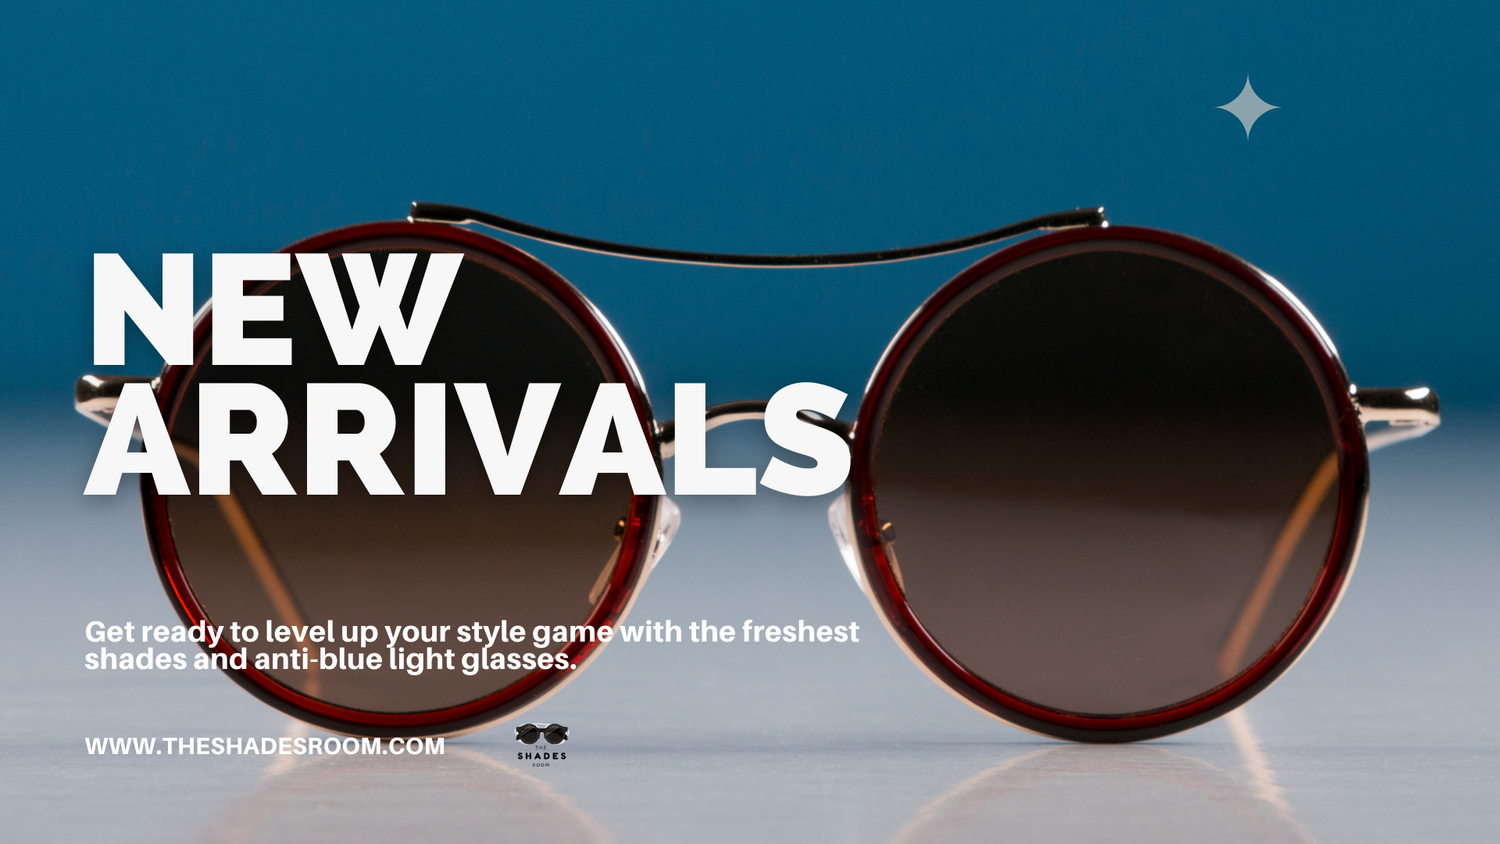 Shop The Latest Trends in Sunglasses & Anti-Blue Light Shades At The Shades Room.com